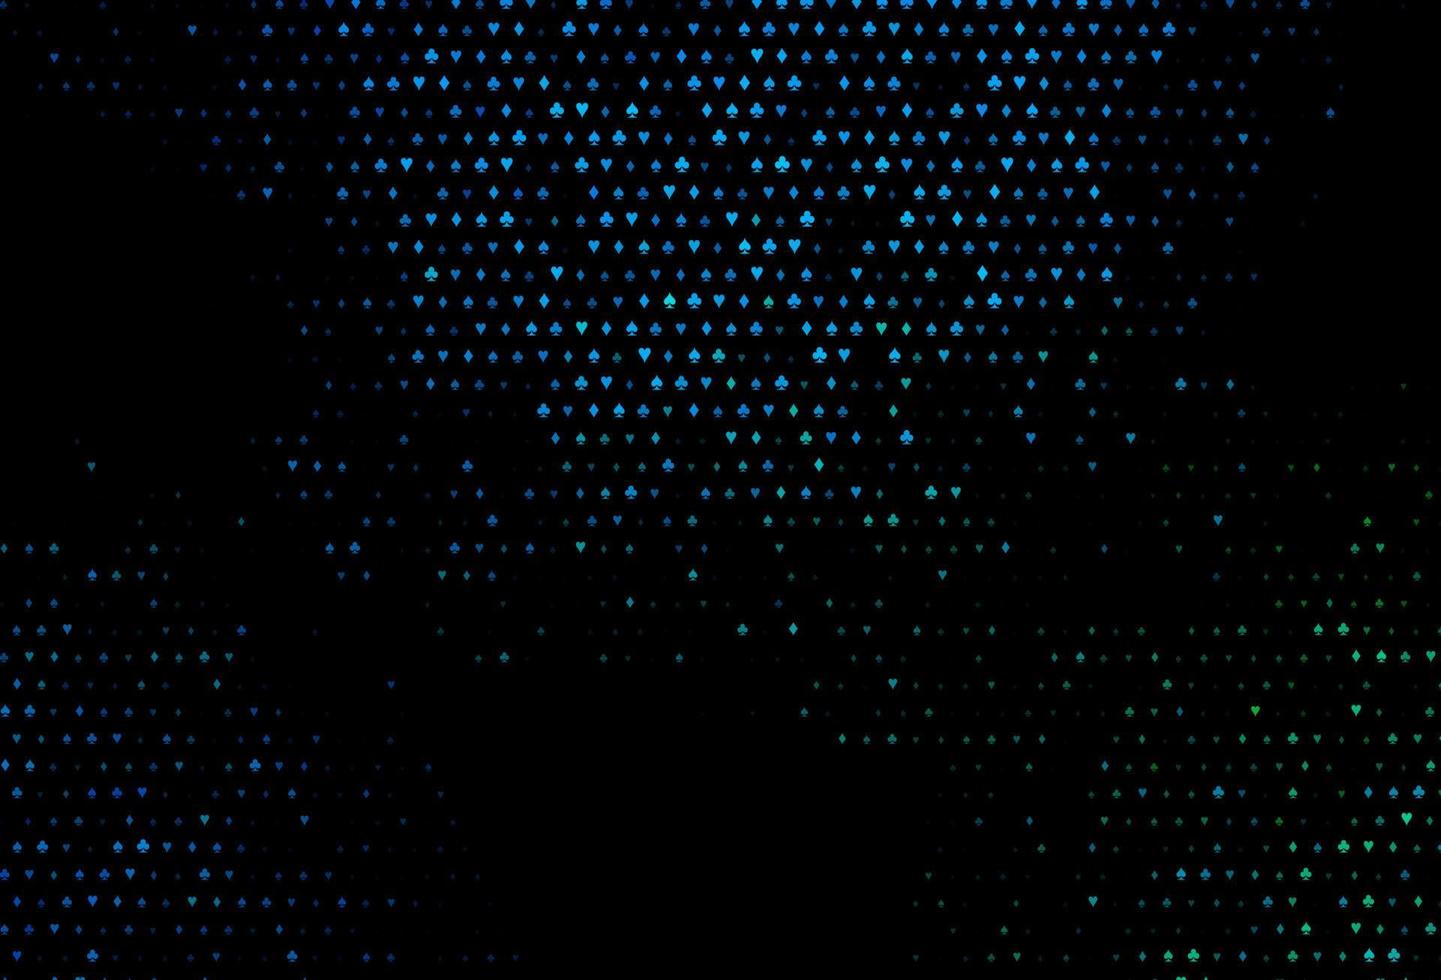 Dark blue, green vector texture with playing cards.